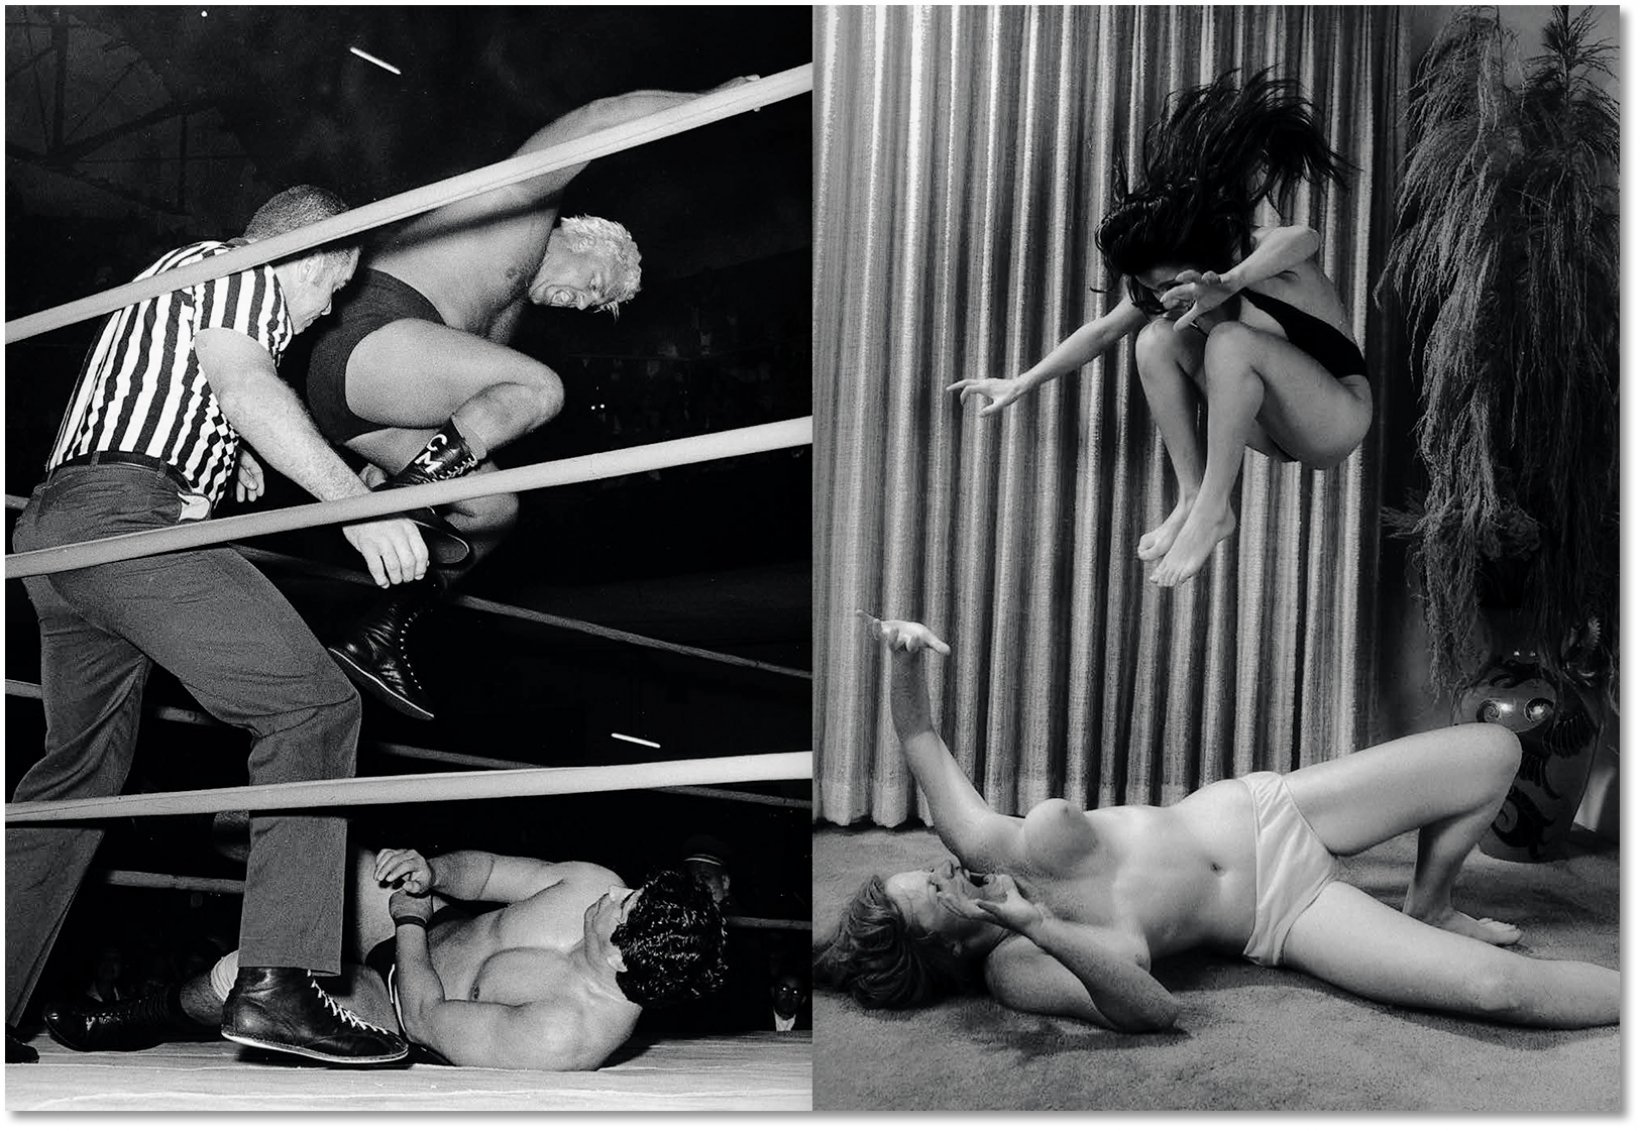 The Spectacular and Erotic World of Wrestling - image 11.